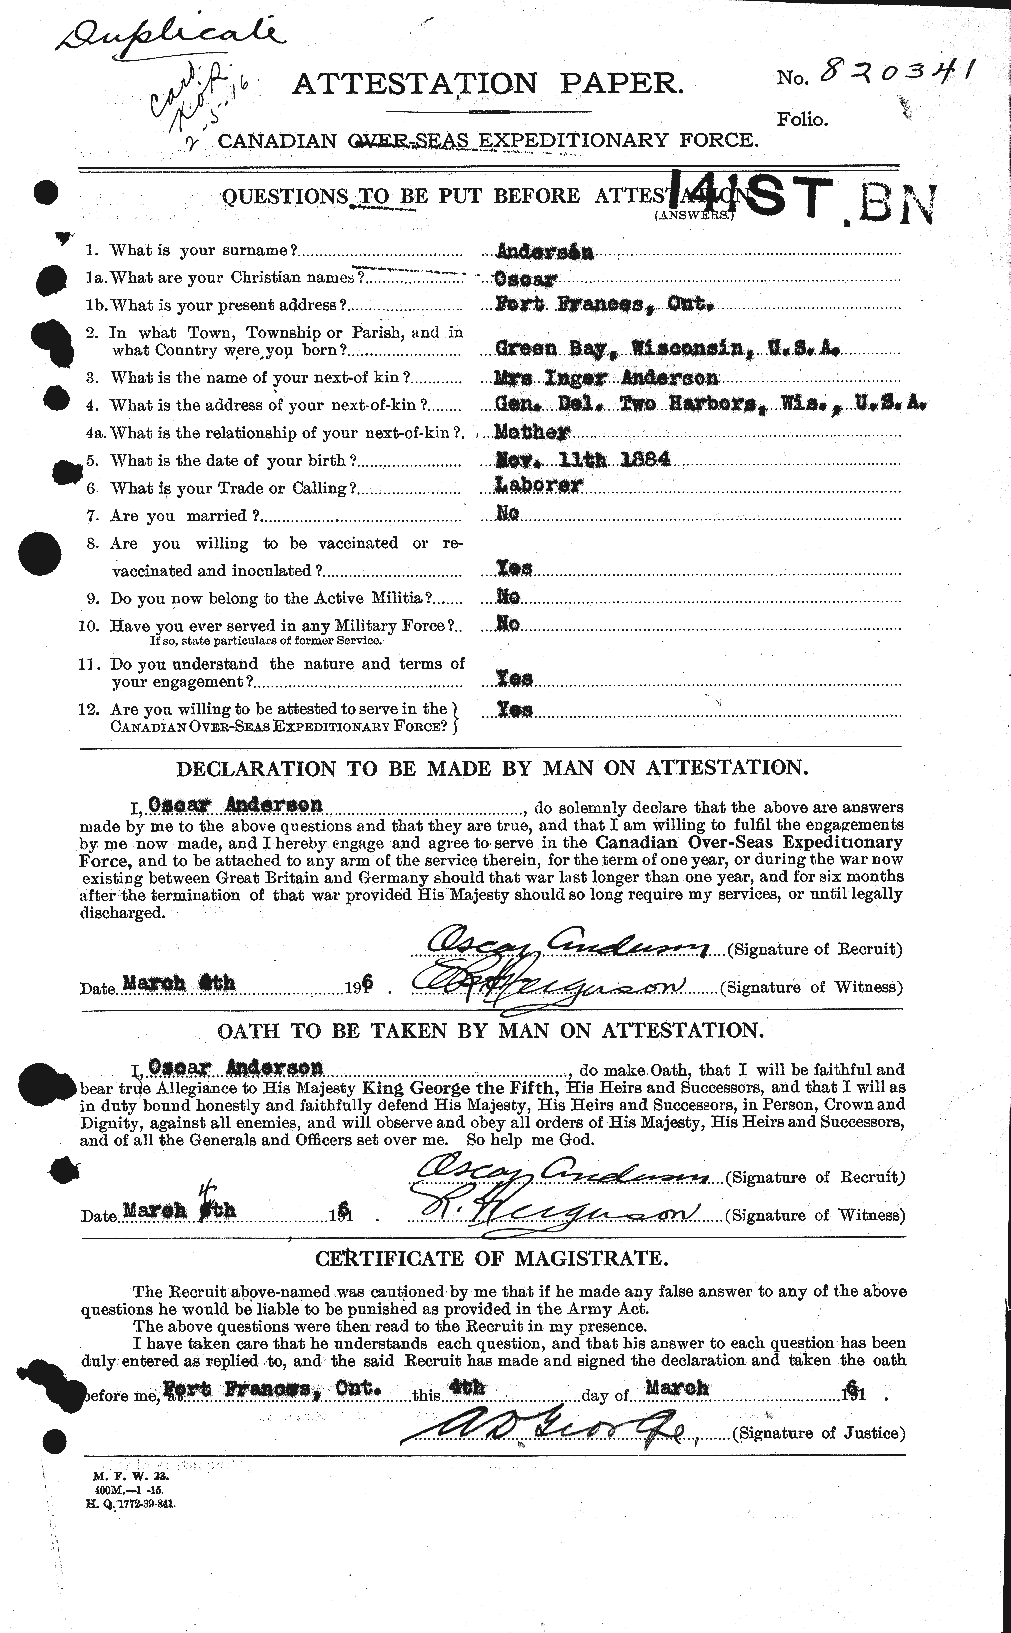 Personnel Records of the First World War - CEF 207388a